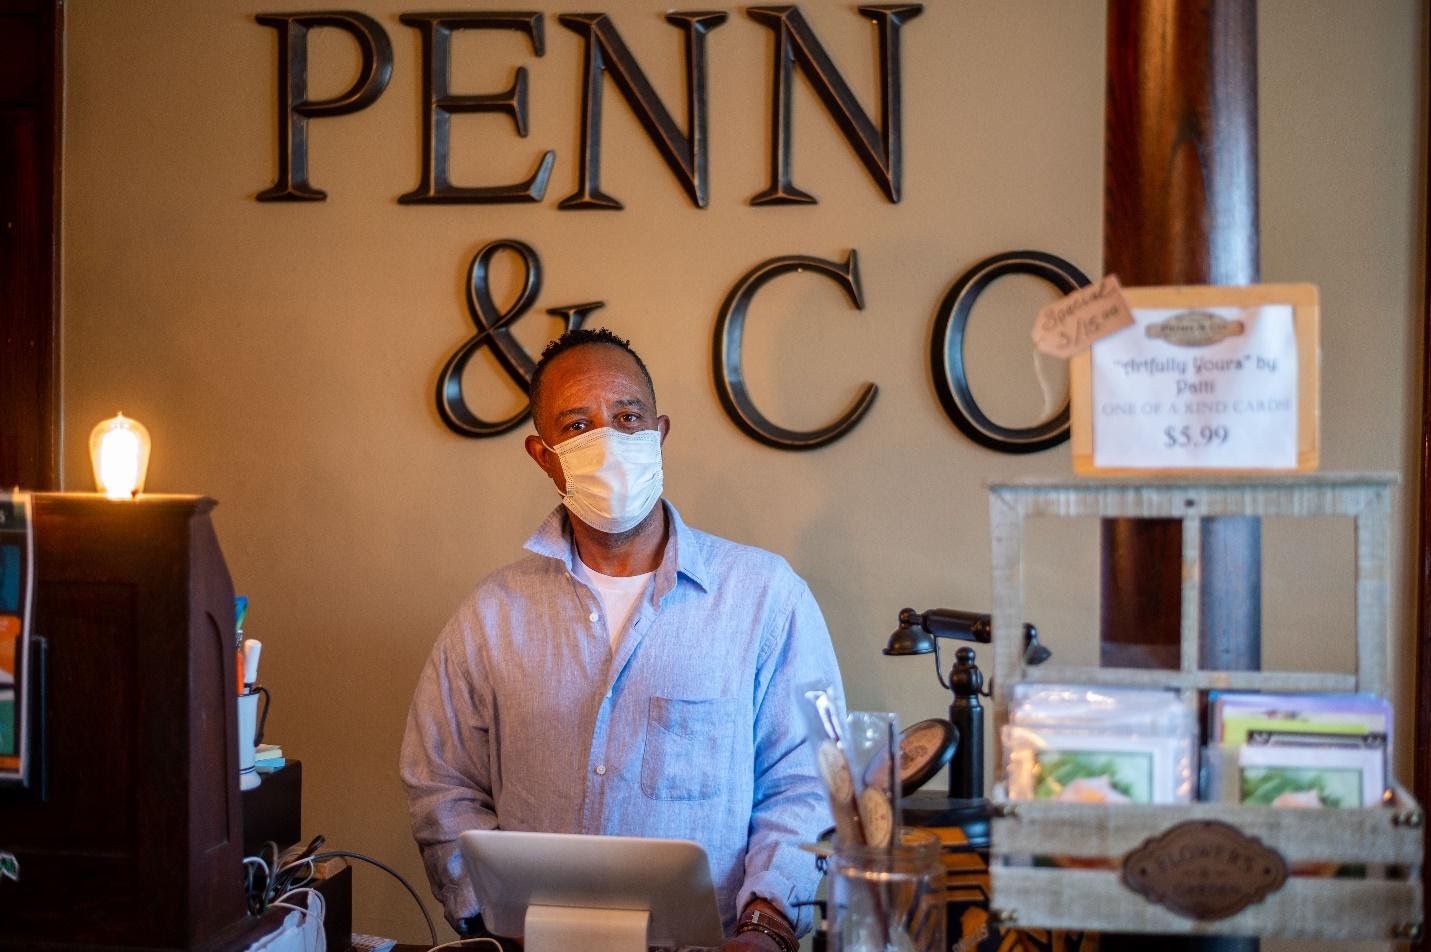 Creating specialty fragrances makes good business scents for Penn